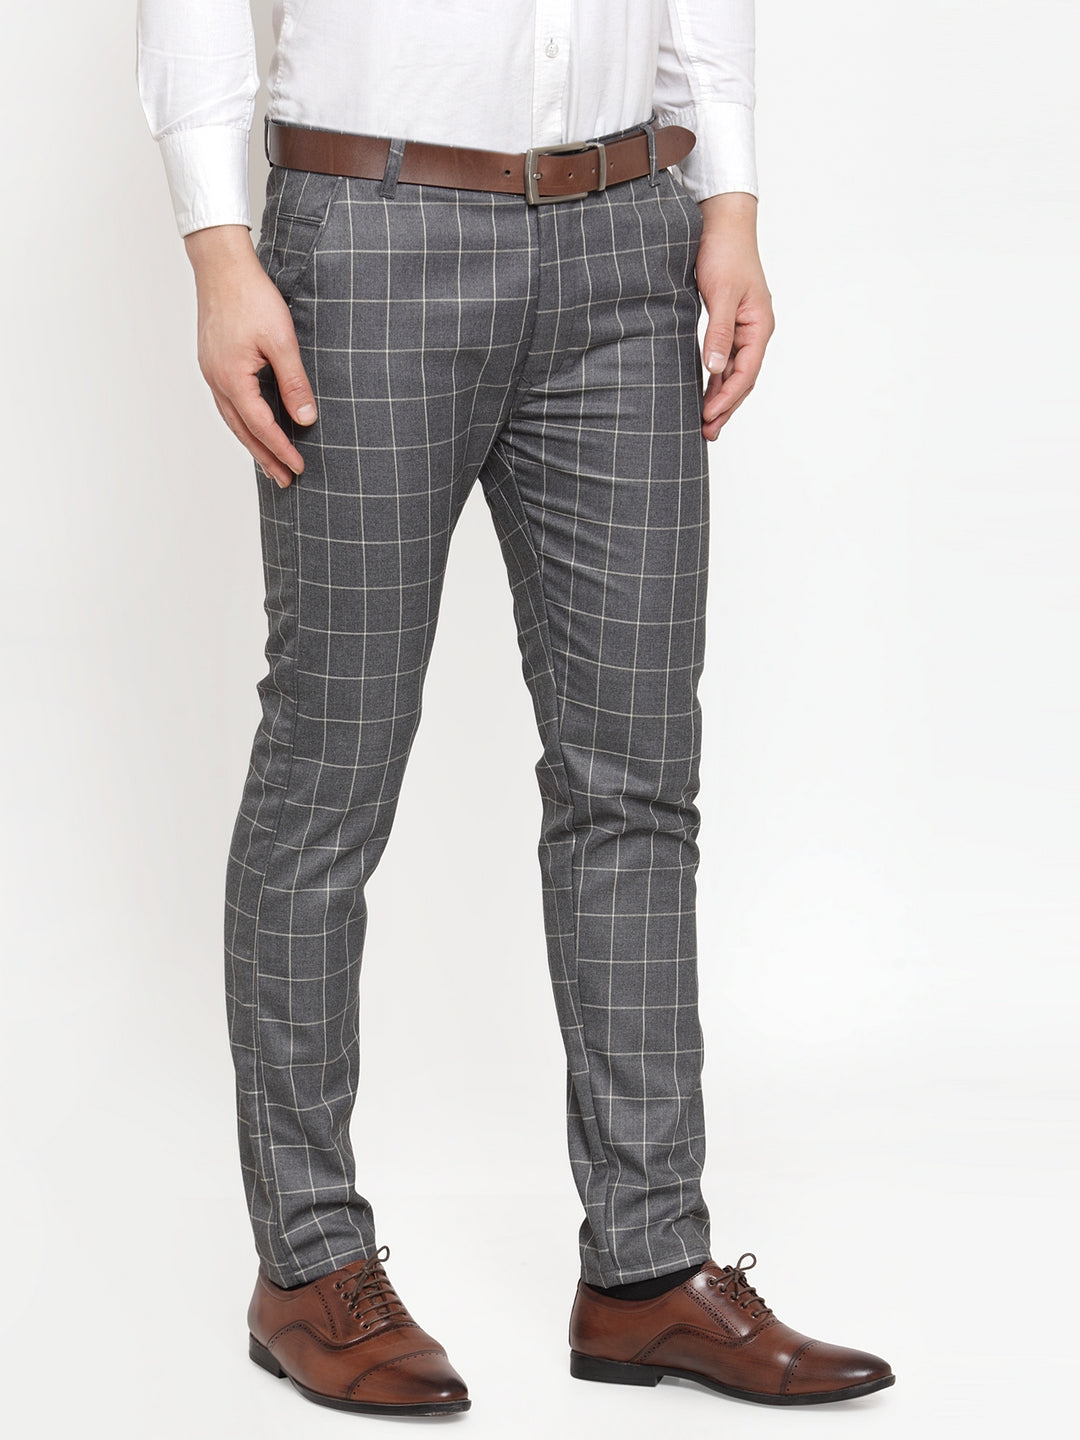 Invictus Grey  Black Slim Fit Checked Formal Trousers for men price  Best  buy price in India August 2023 detail  trends  PriceHunt